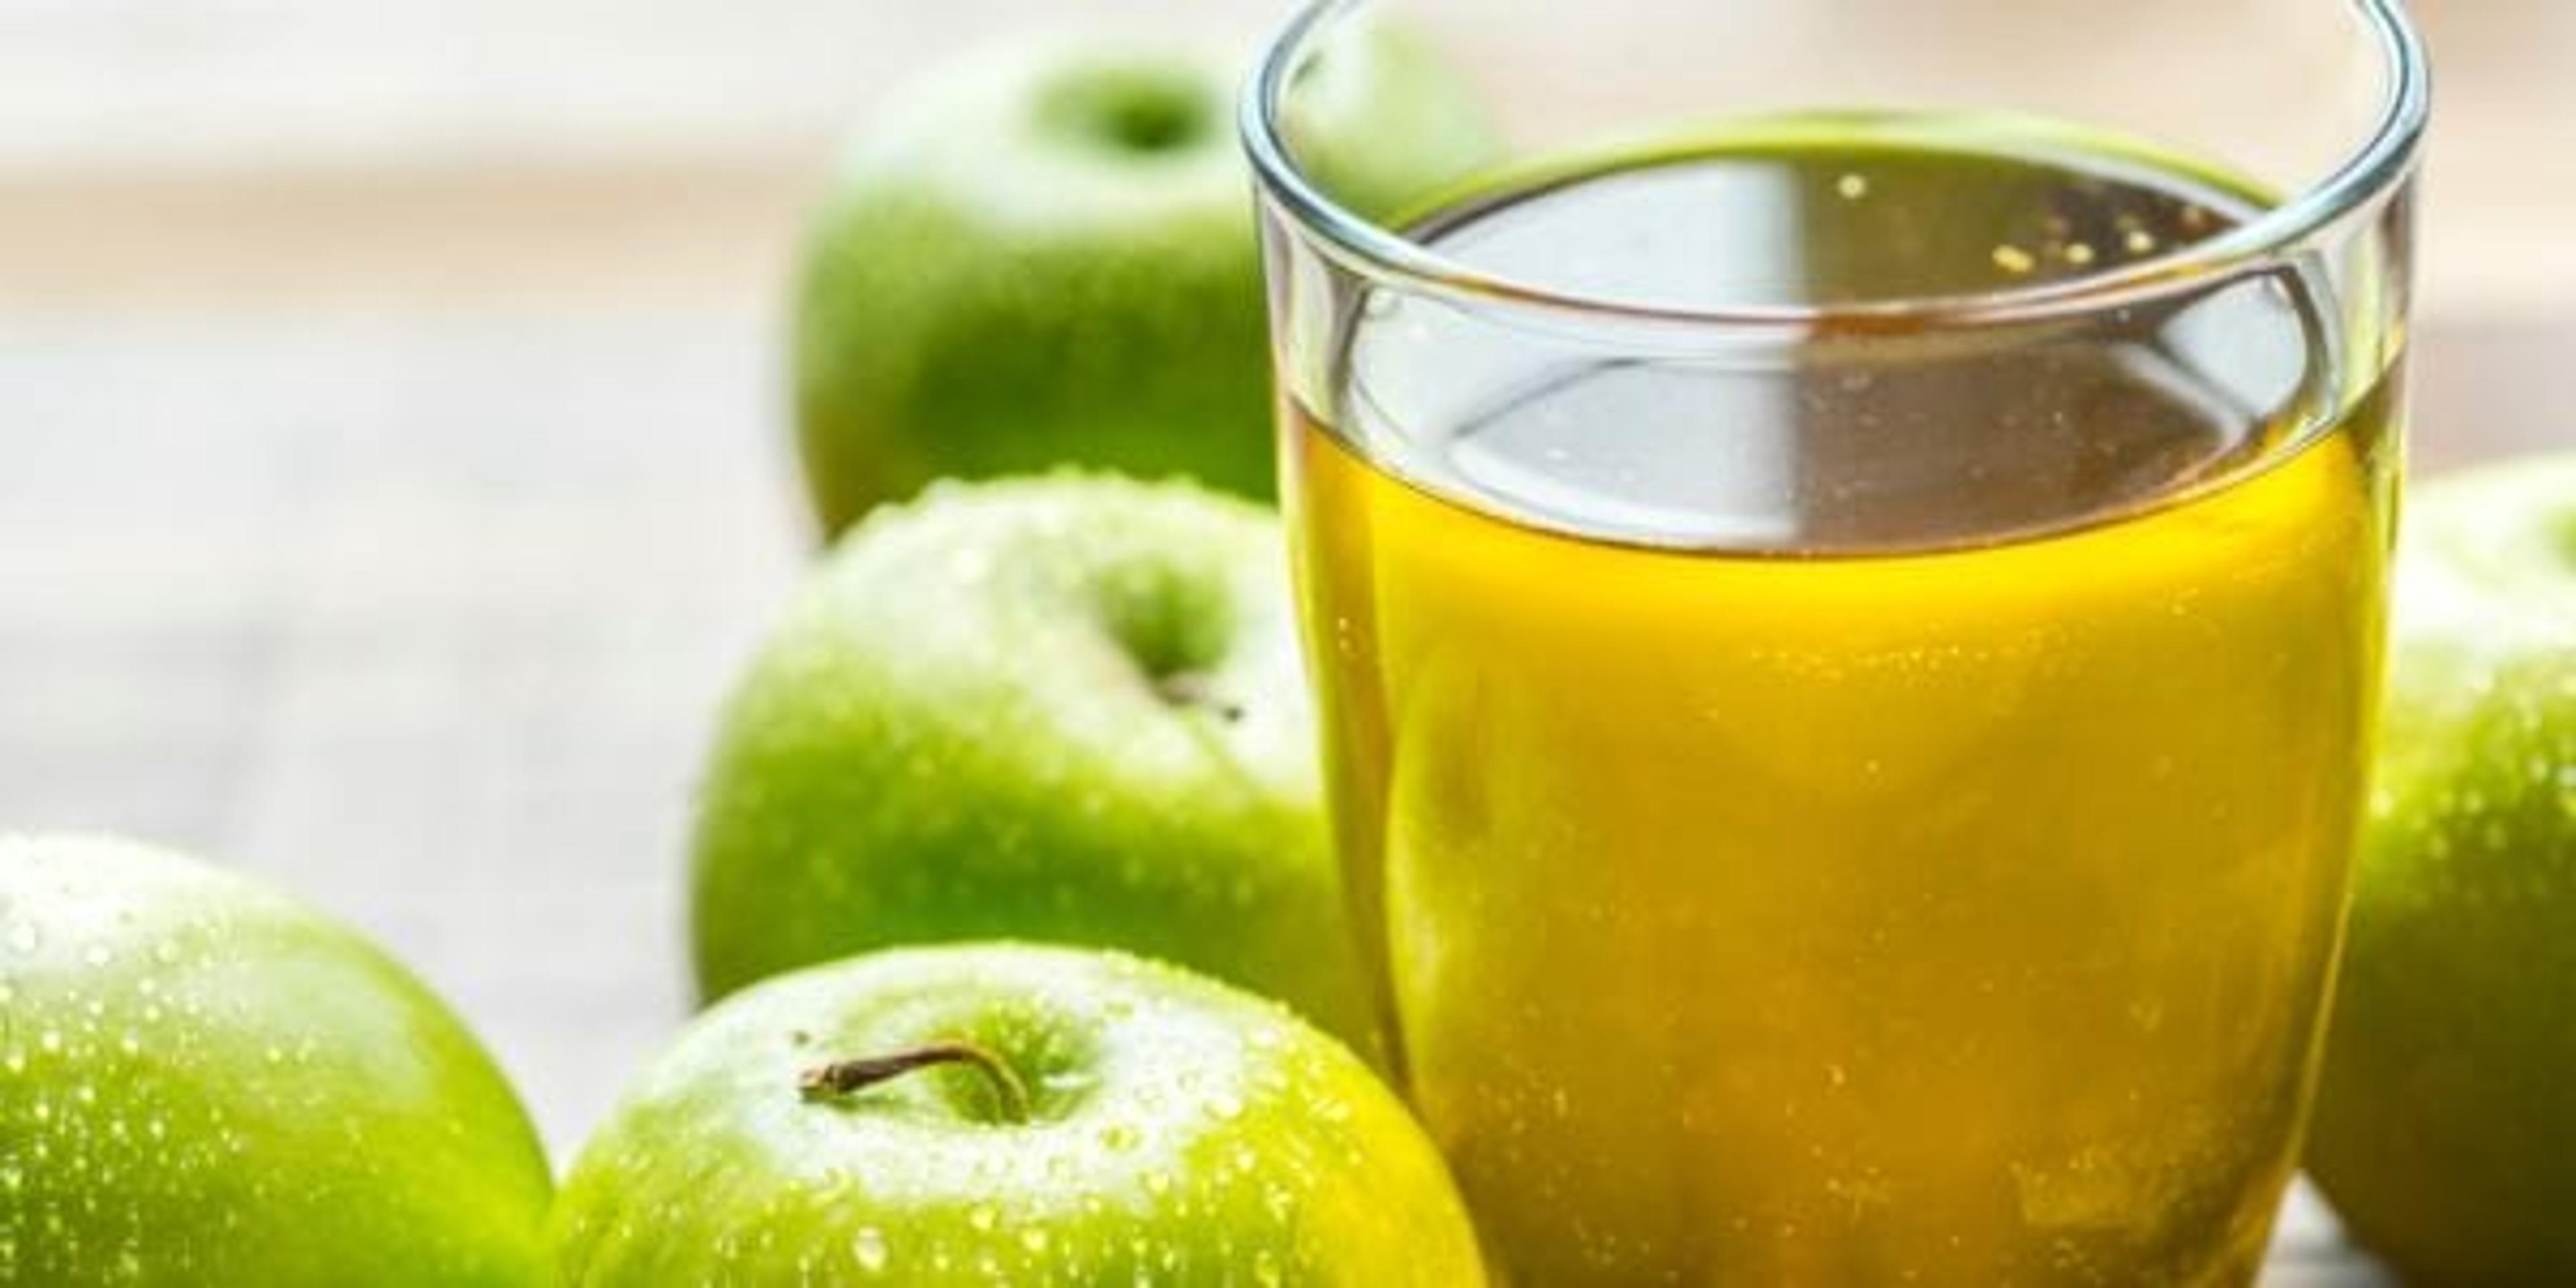 Green aples next to apple cider